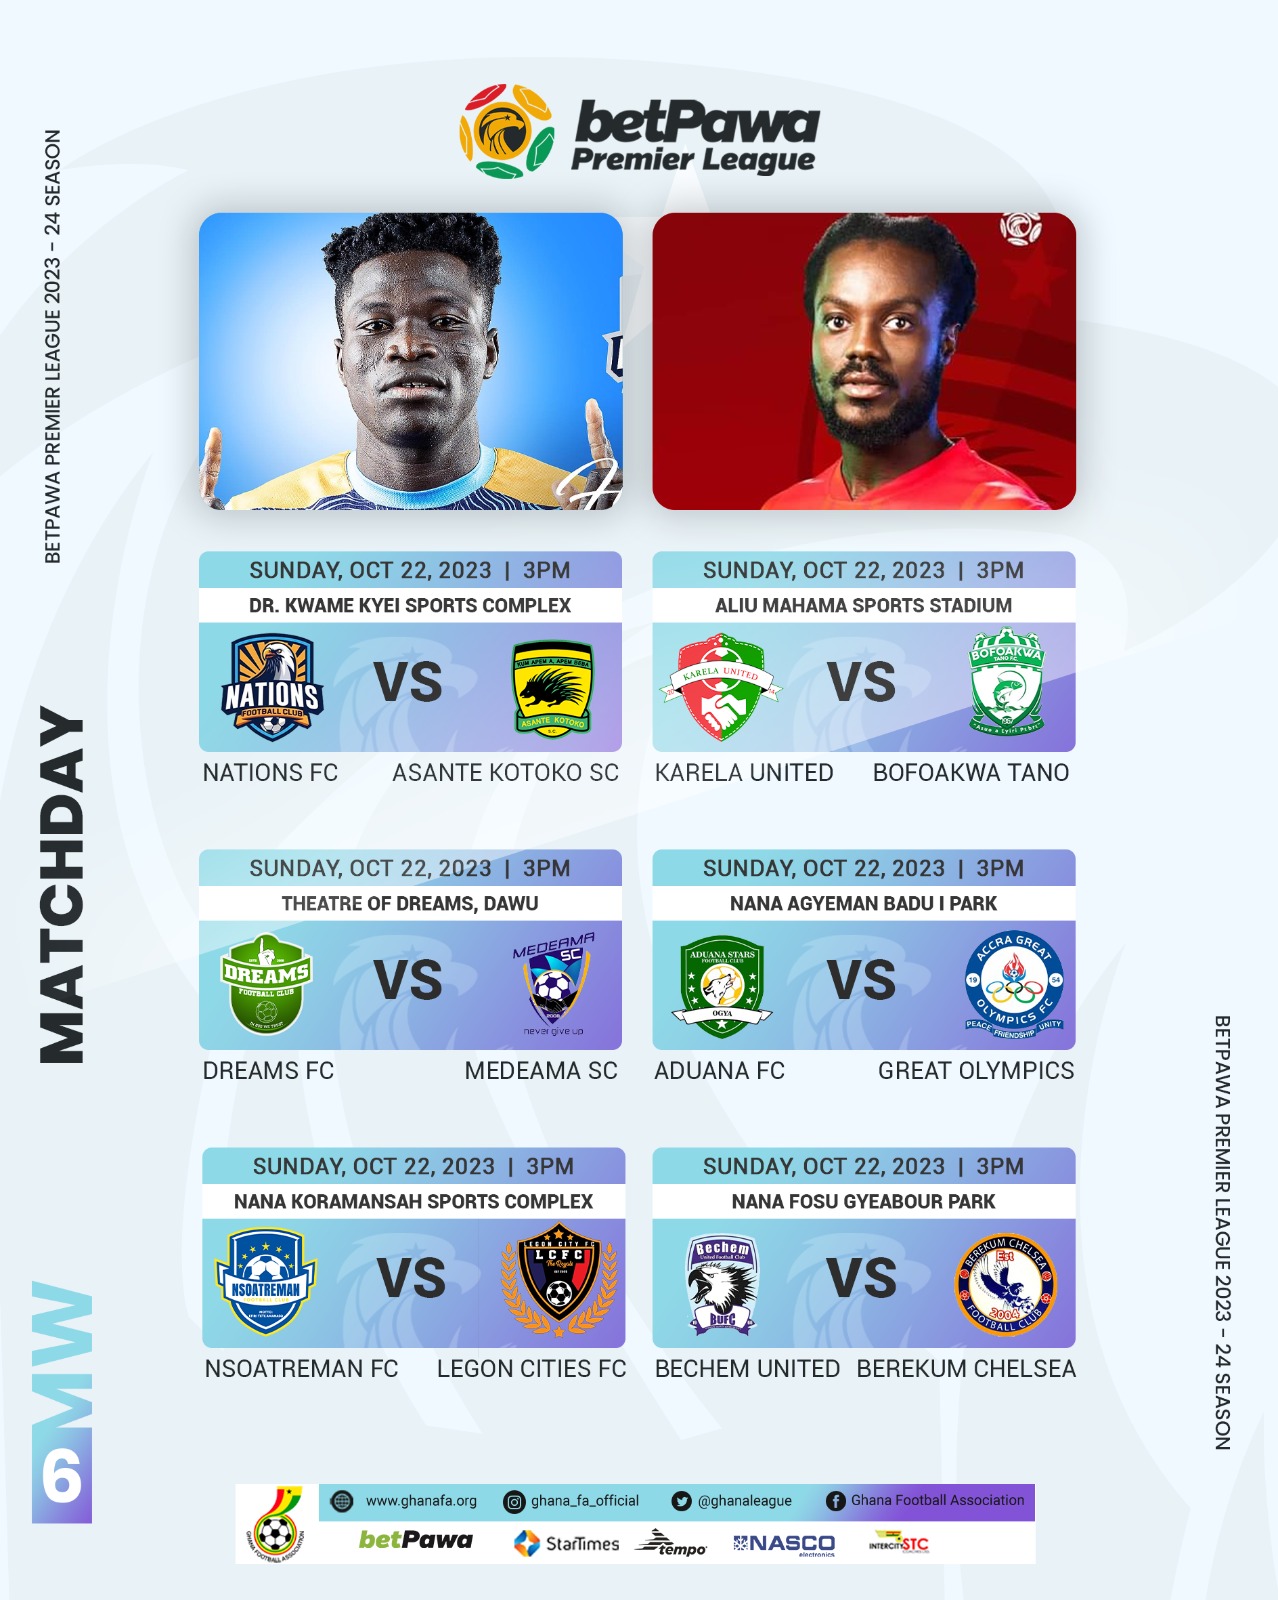 Nations FC clash with Asante Kotoko on Sunday